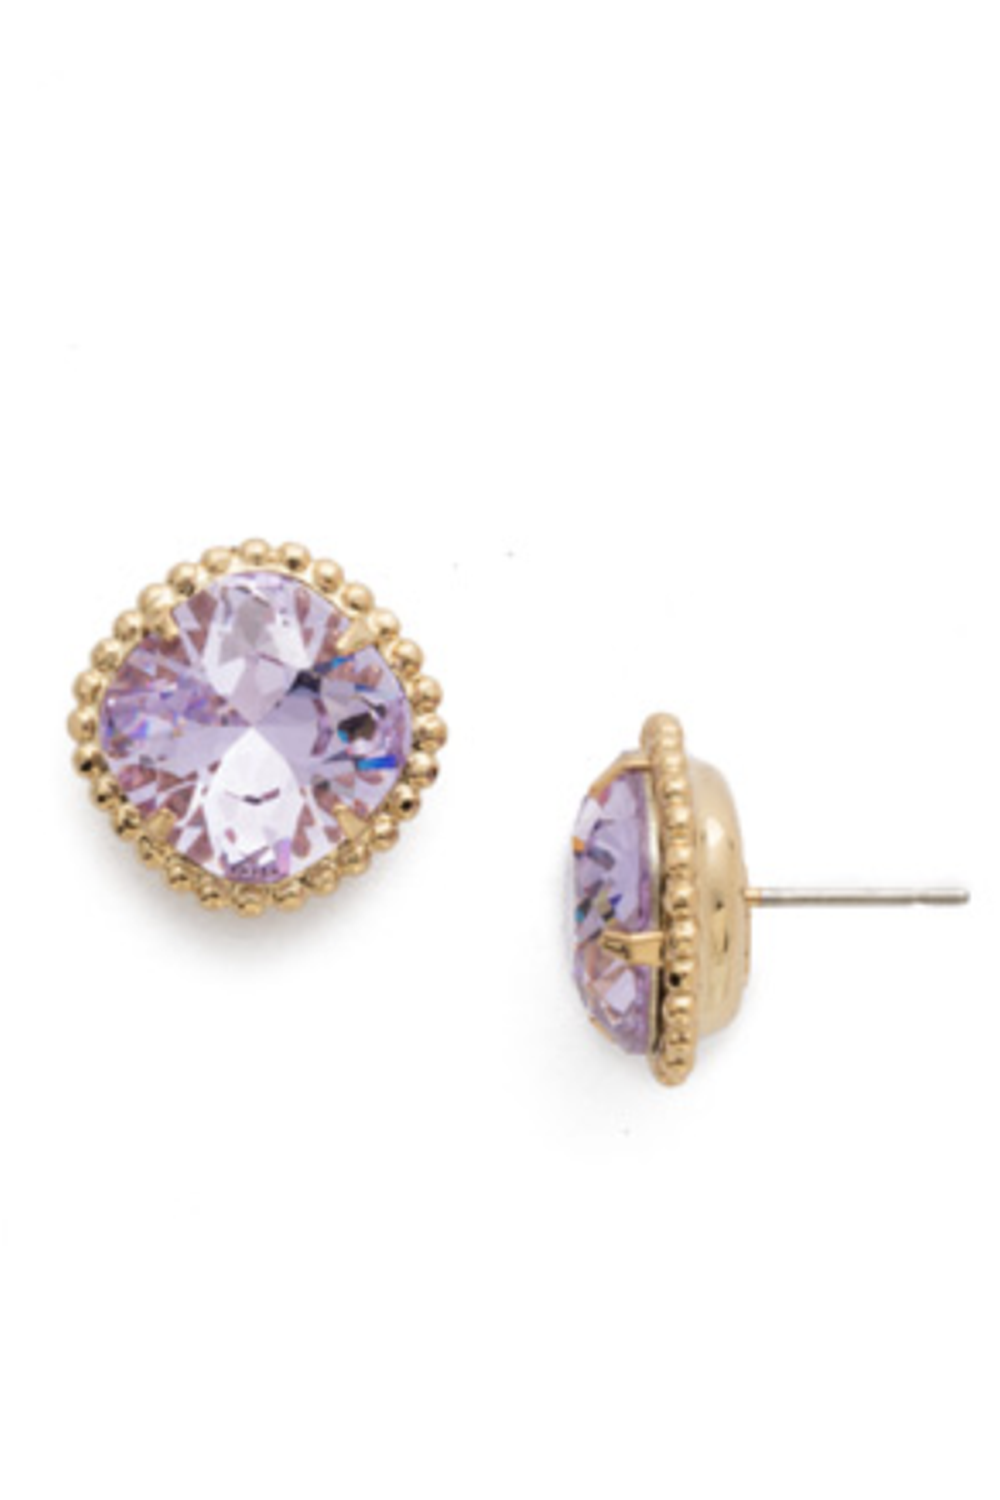 Cushion Cut Solitaire Stud Earring - Violet